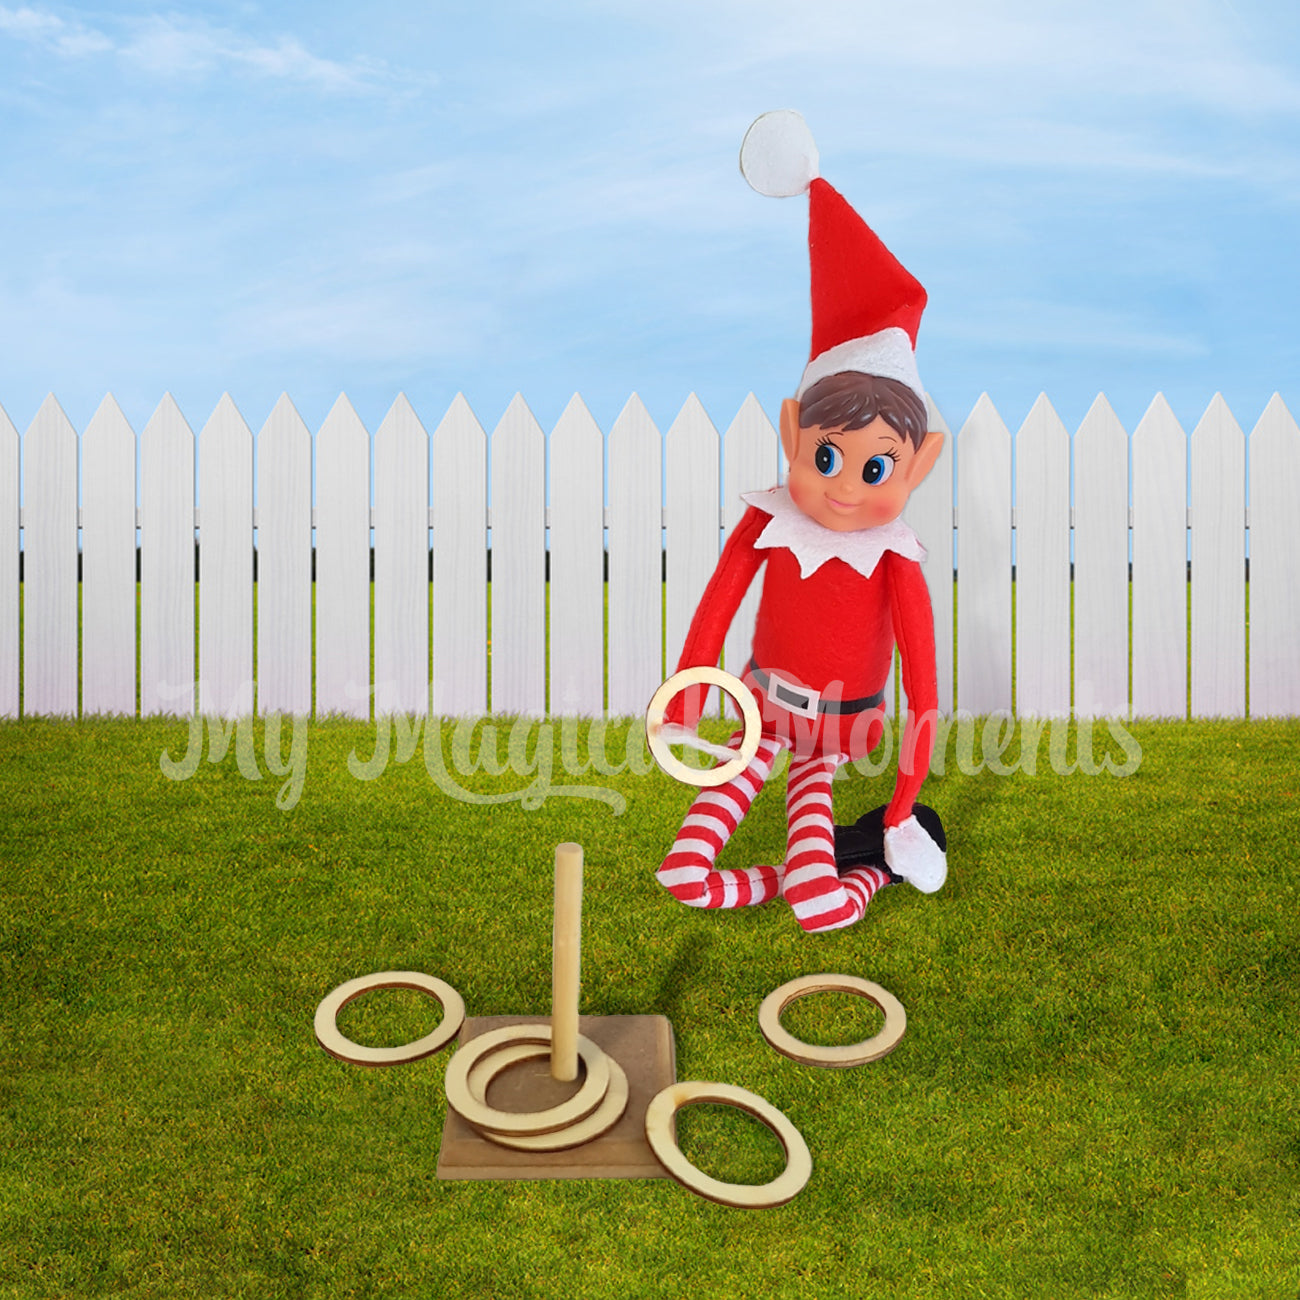 elves behavin badly playing a game of quoits